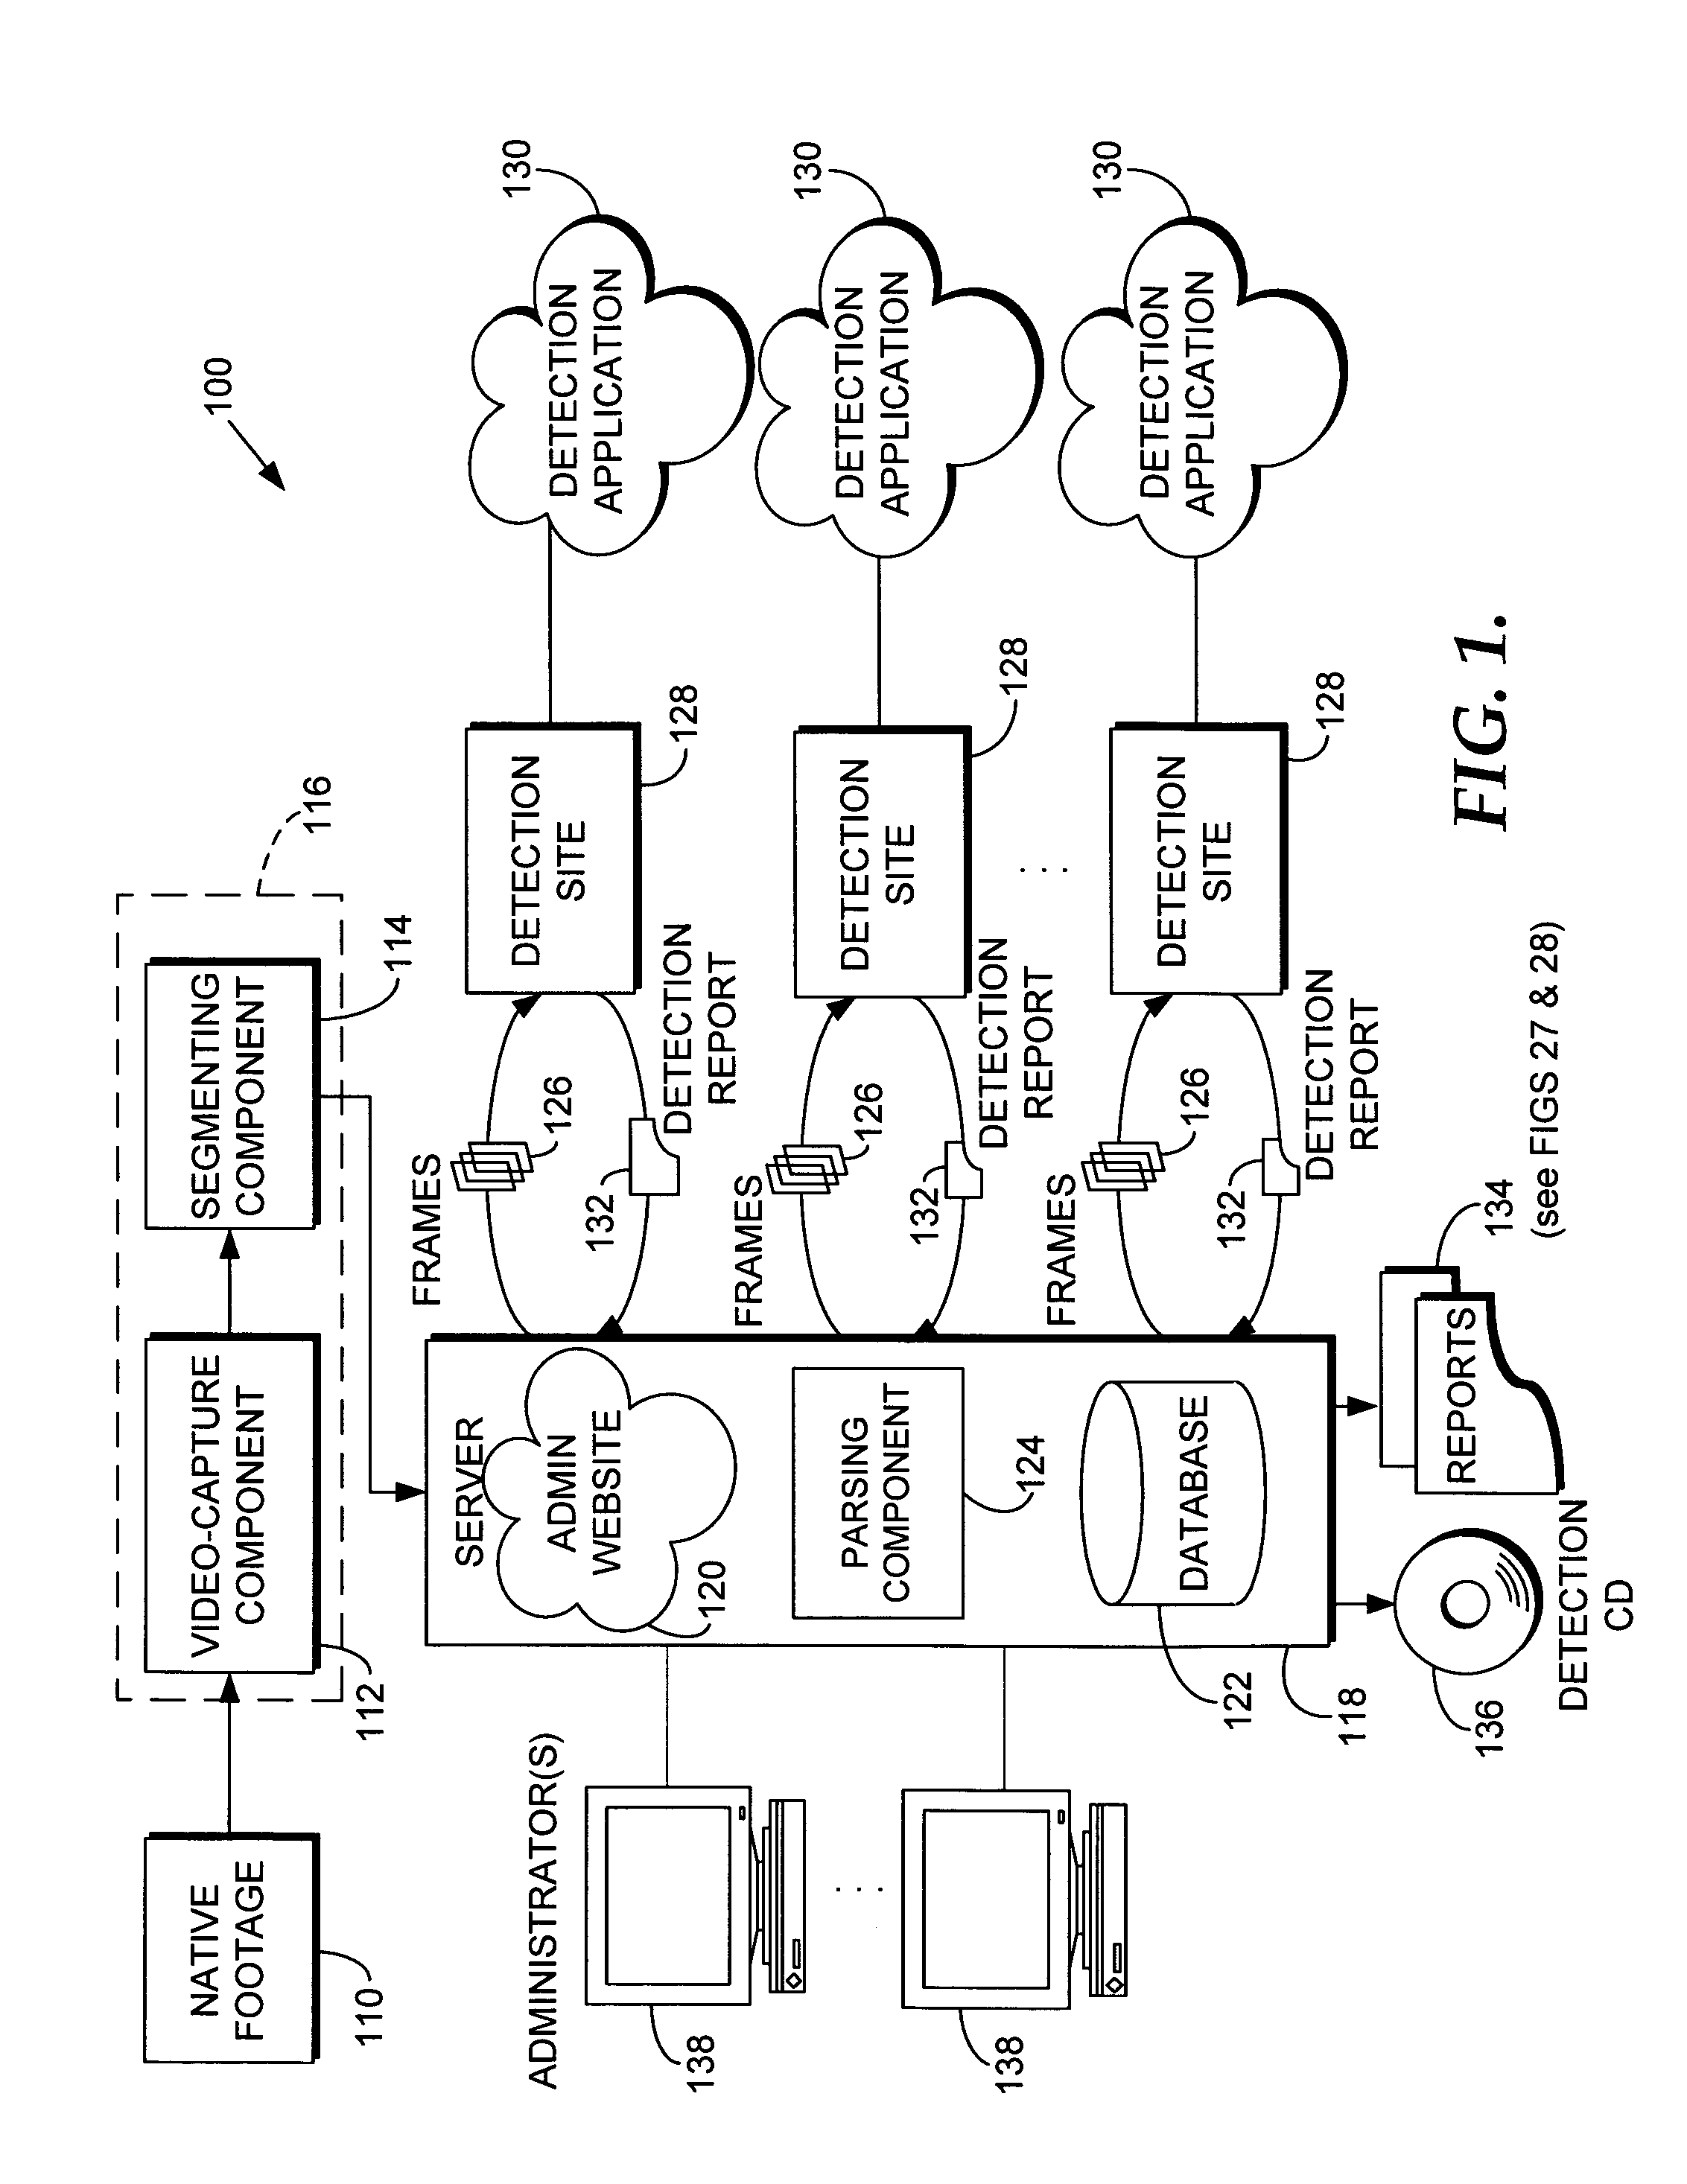 Method and system for quantifying viewer awareness of advertising images in a video source